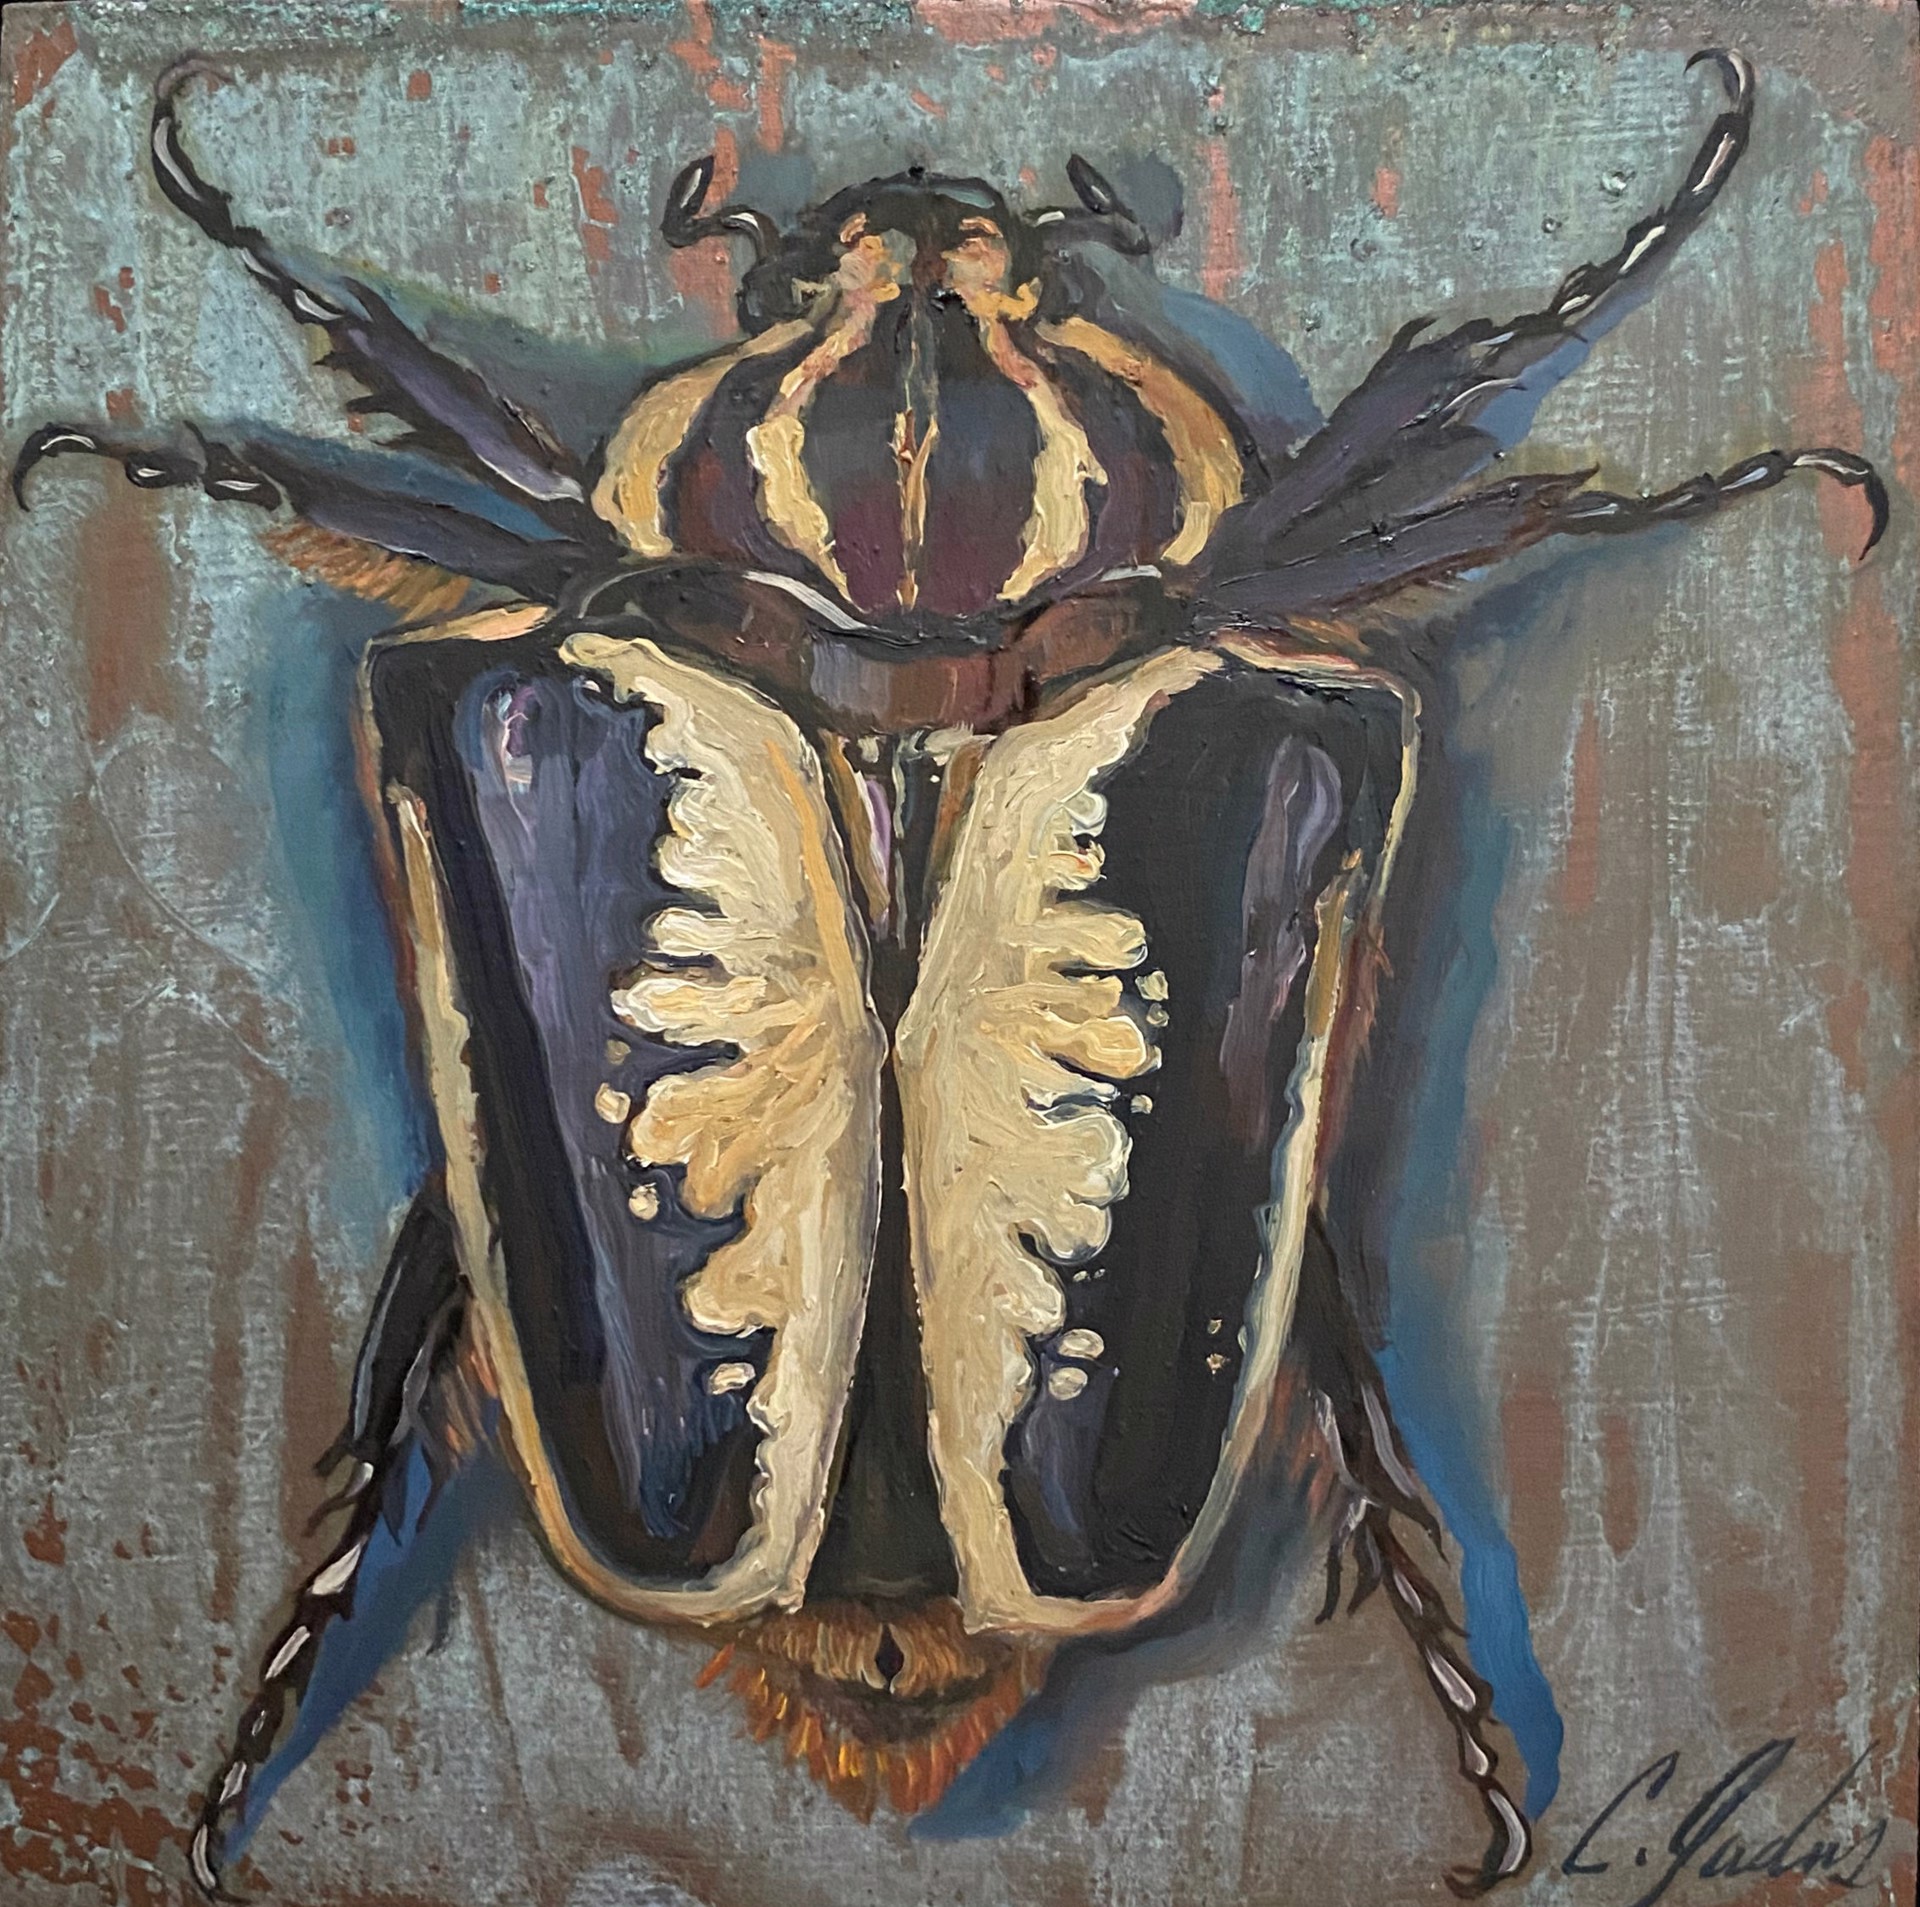 Rorschach Scarab by Carrie Jadus